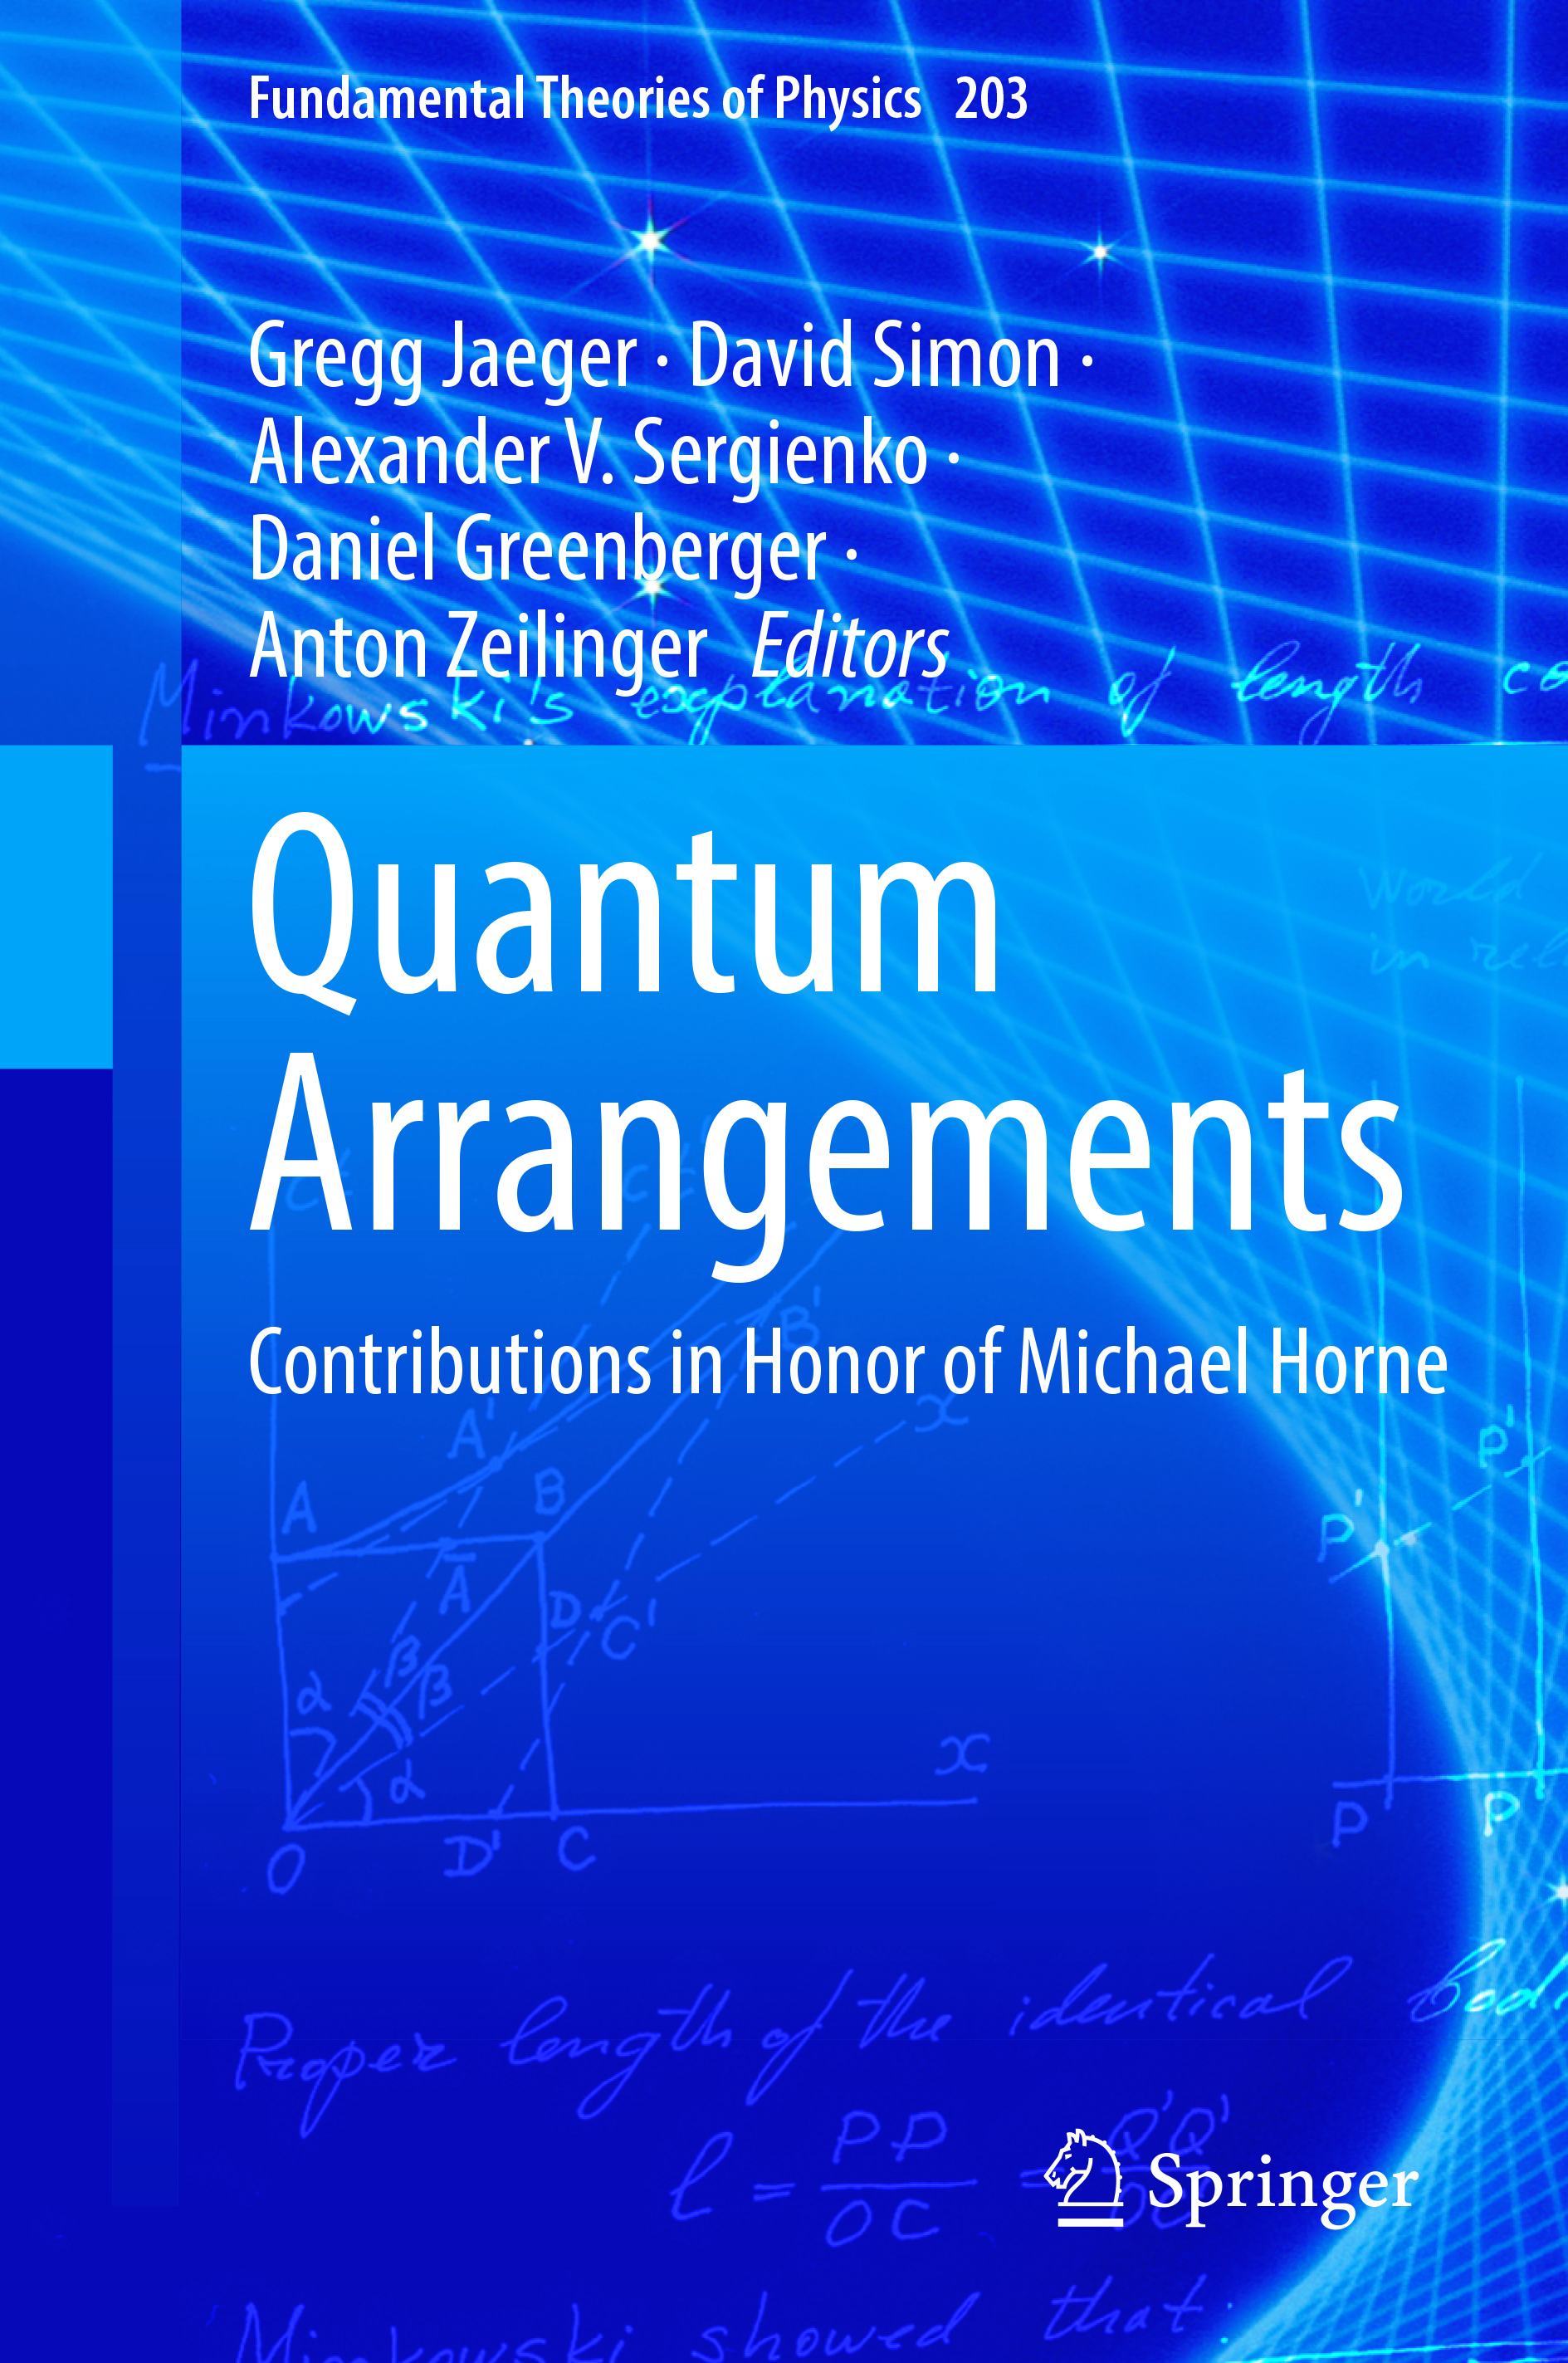 Laboratory-Space and Configuration-Space Formulations of Quantum Mechanics, Versus Bell–Clauser–Horne–Shimony Local Realism, Versus Born’s Ambiguity